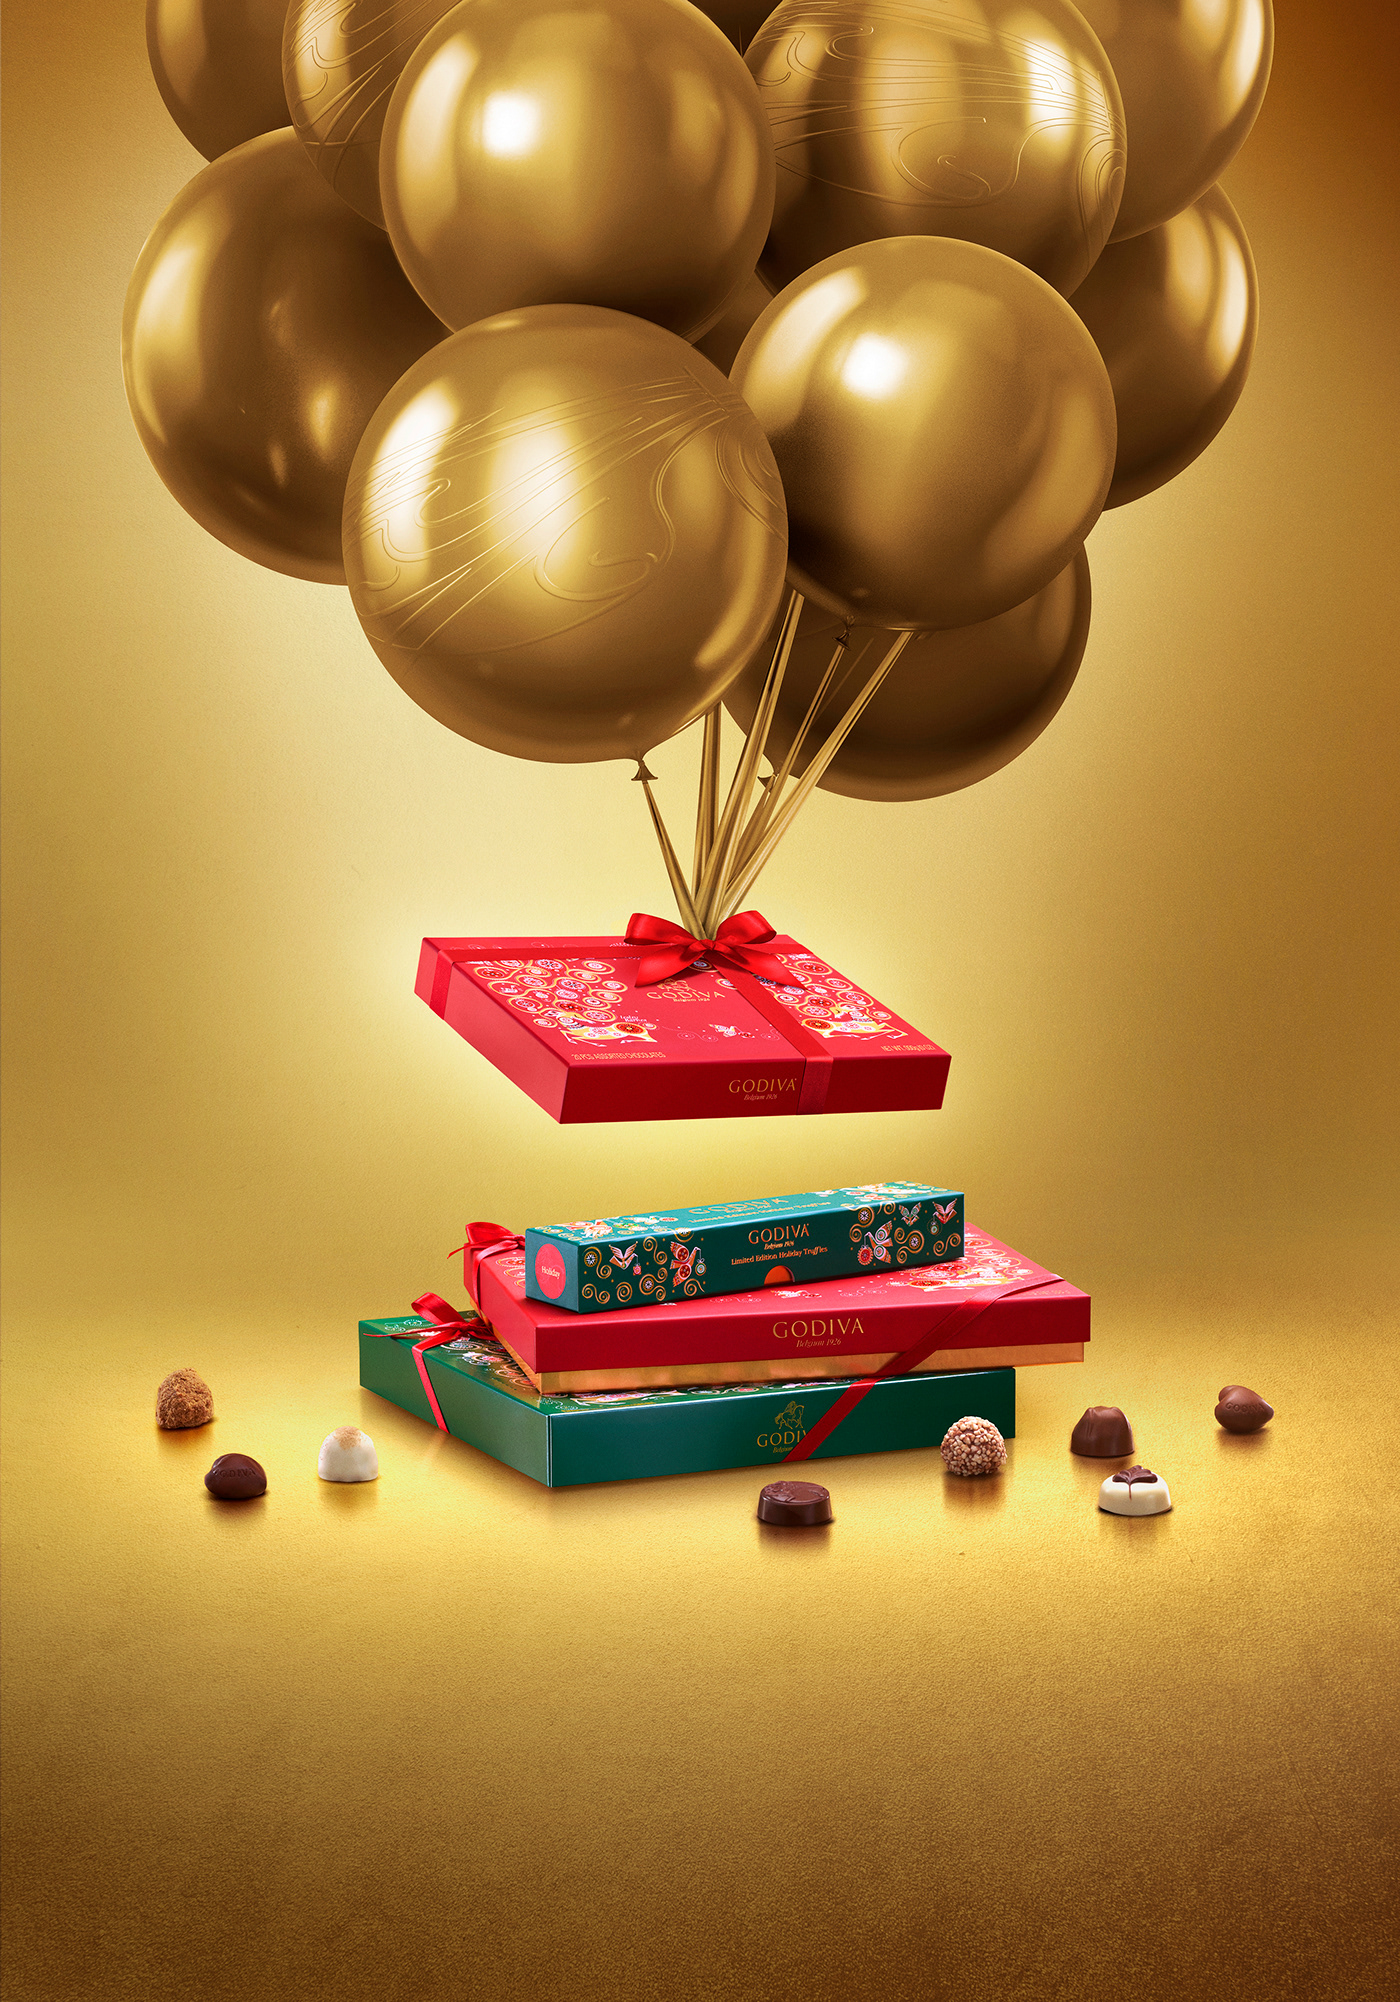 CGI Render retouch commercial Advertising  compositing godiva chocolate balloons